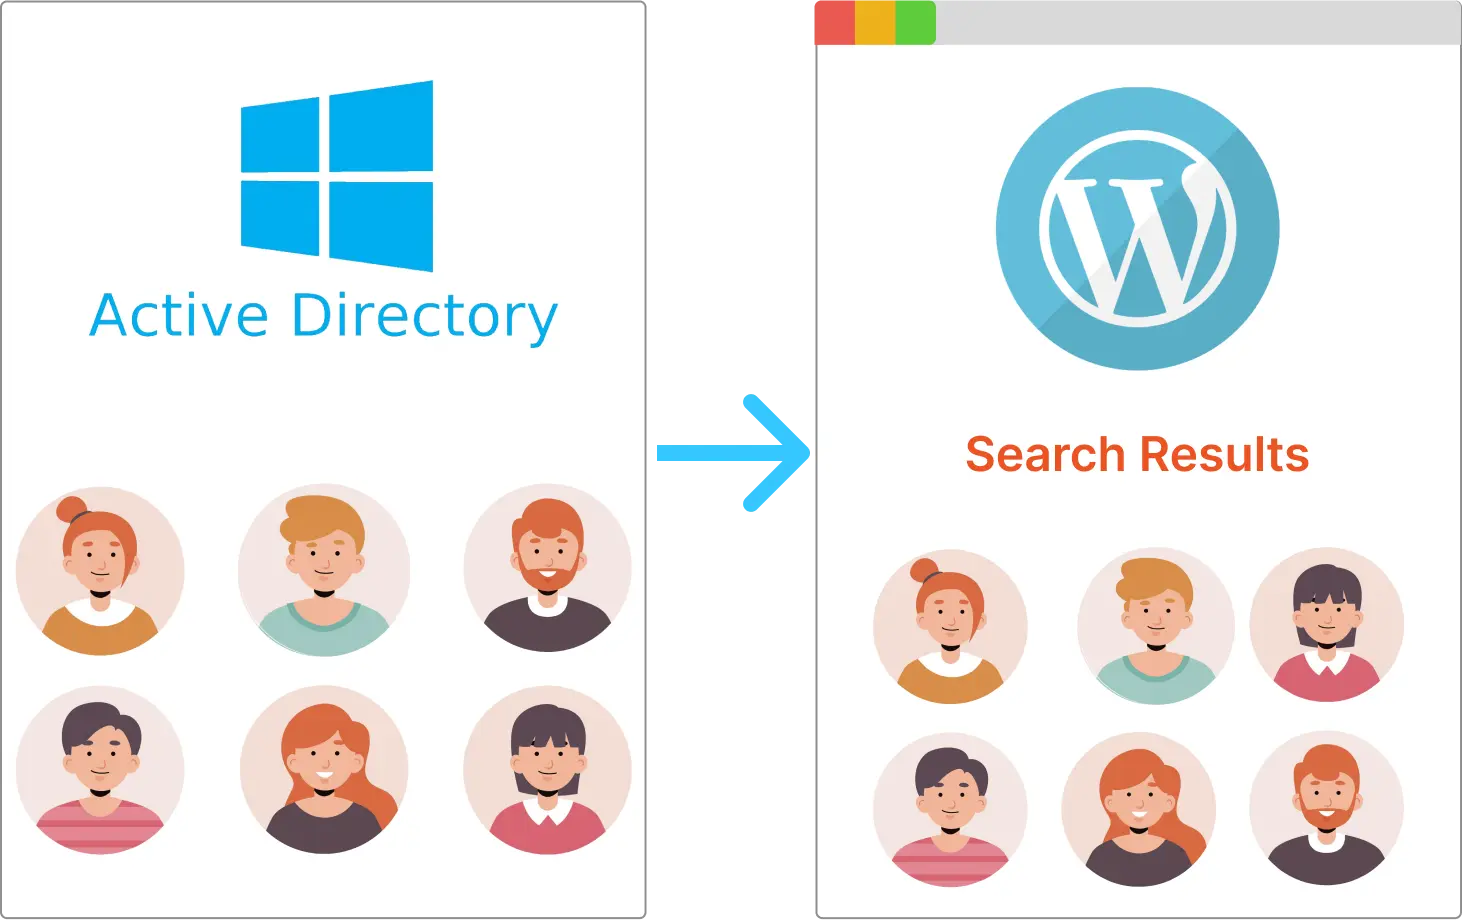 Display Staff Employees with their details from active directory or LDAP Directory on a WordPress Page